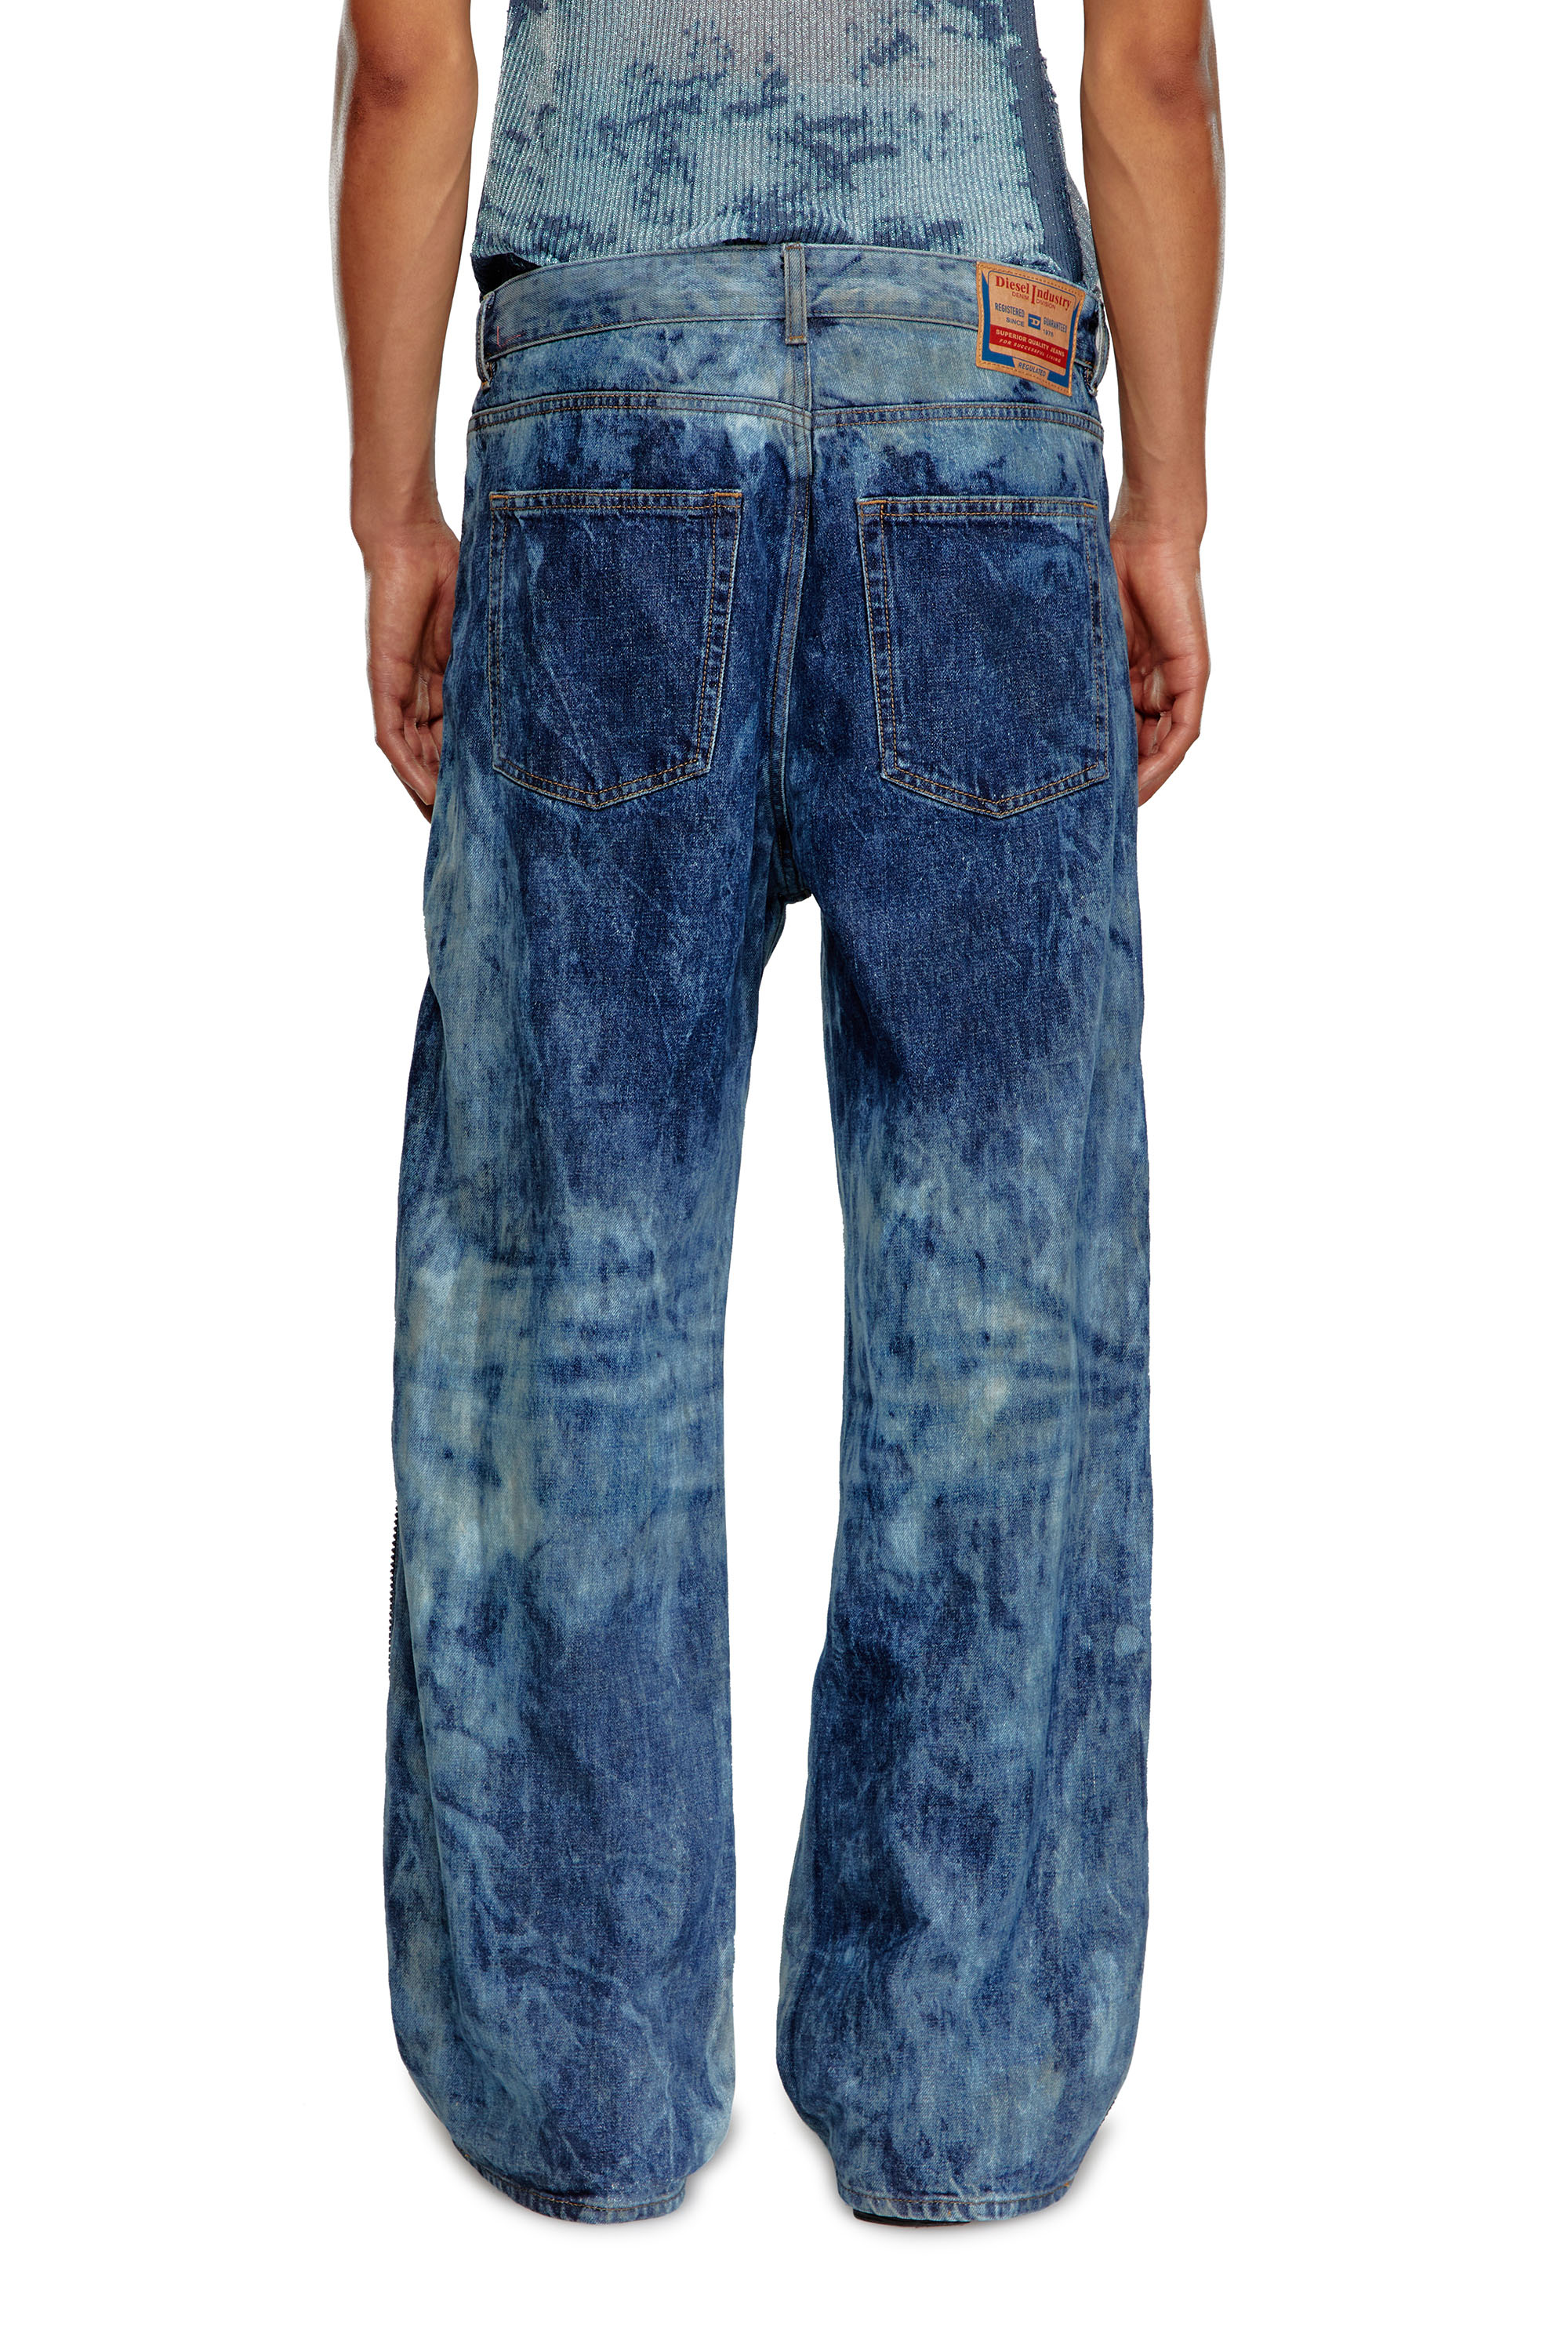 Diesel - Straight Jeans D-Rise 0PGAX, Hombre Straight Jeans - D-Rise in Azul marino - Image 3